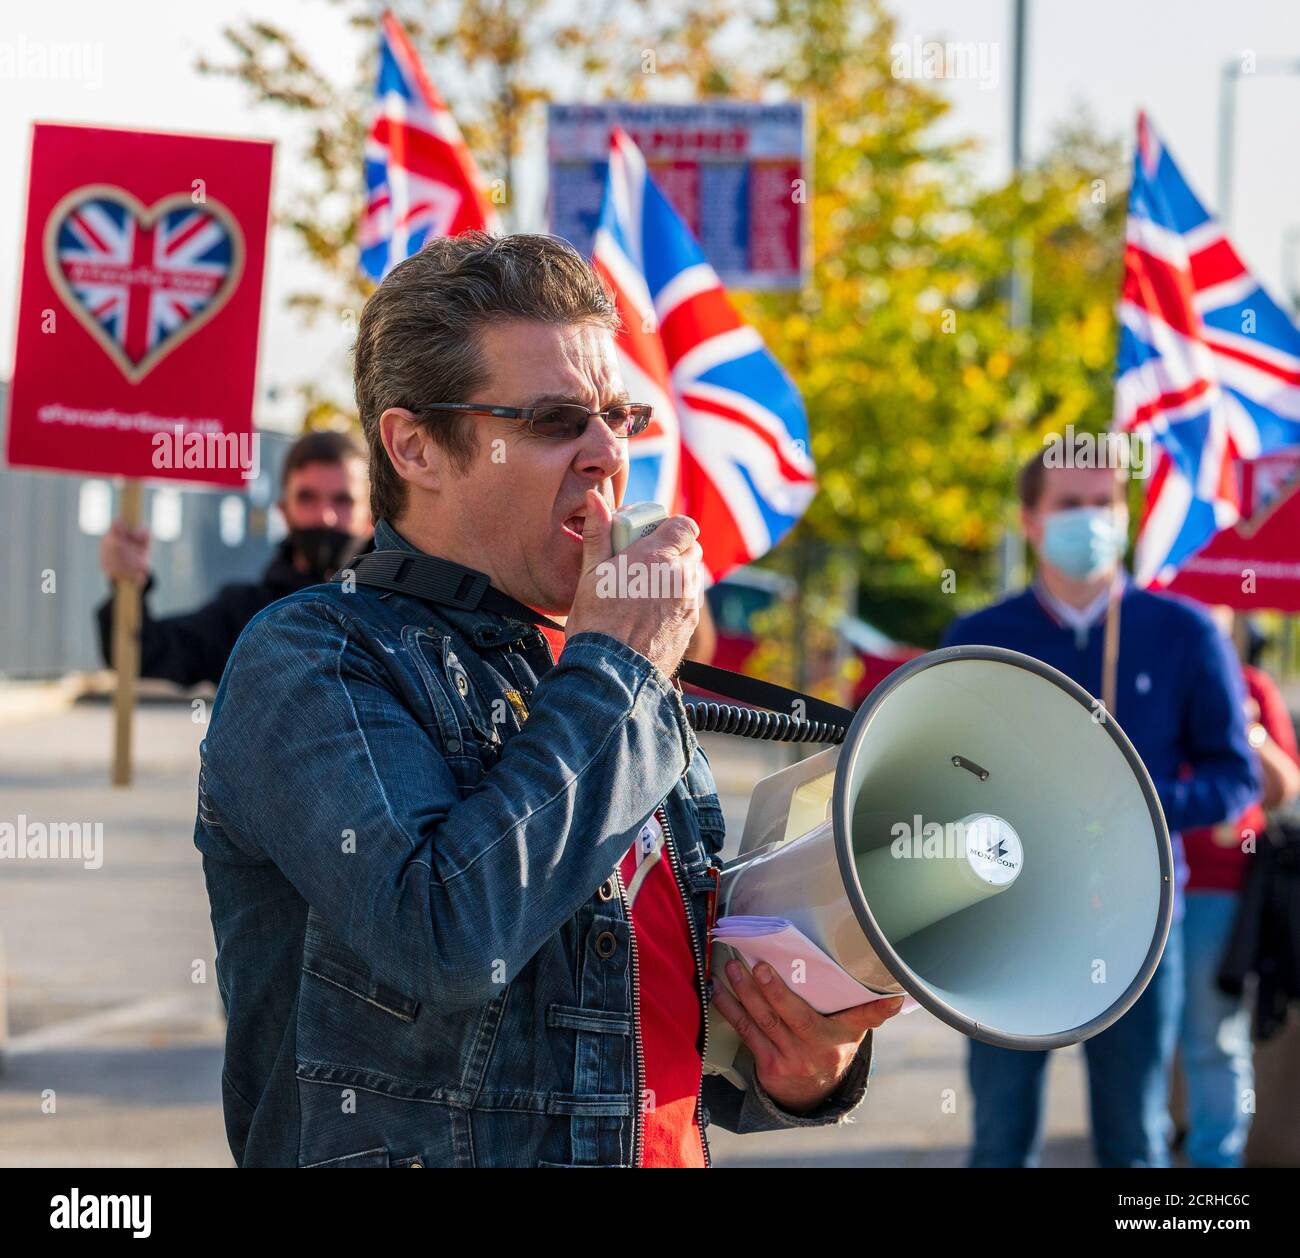 Alistair McConnachie, the leader of the Pro Unionist political pressure group called 'a Force for Good' at a political rally, Glasgow, Scotland, UK Stock Photo